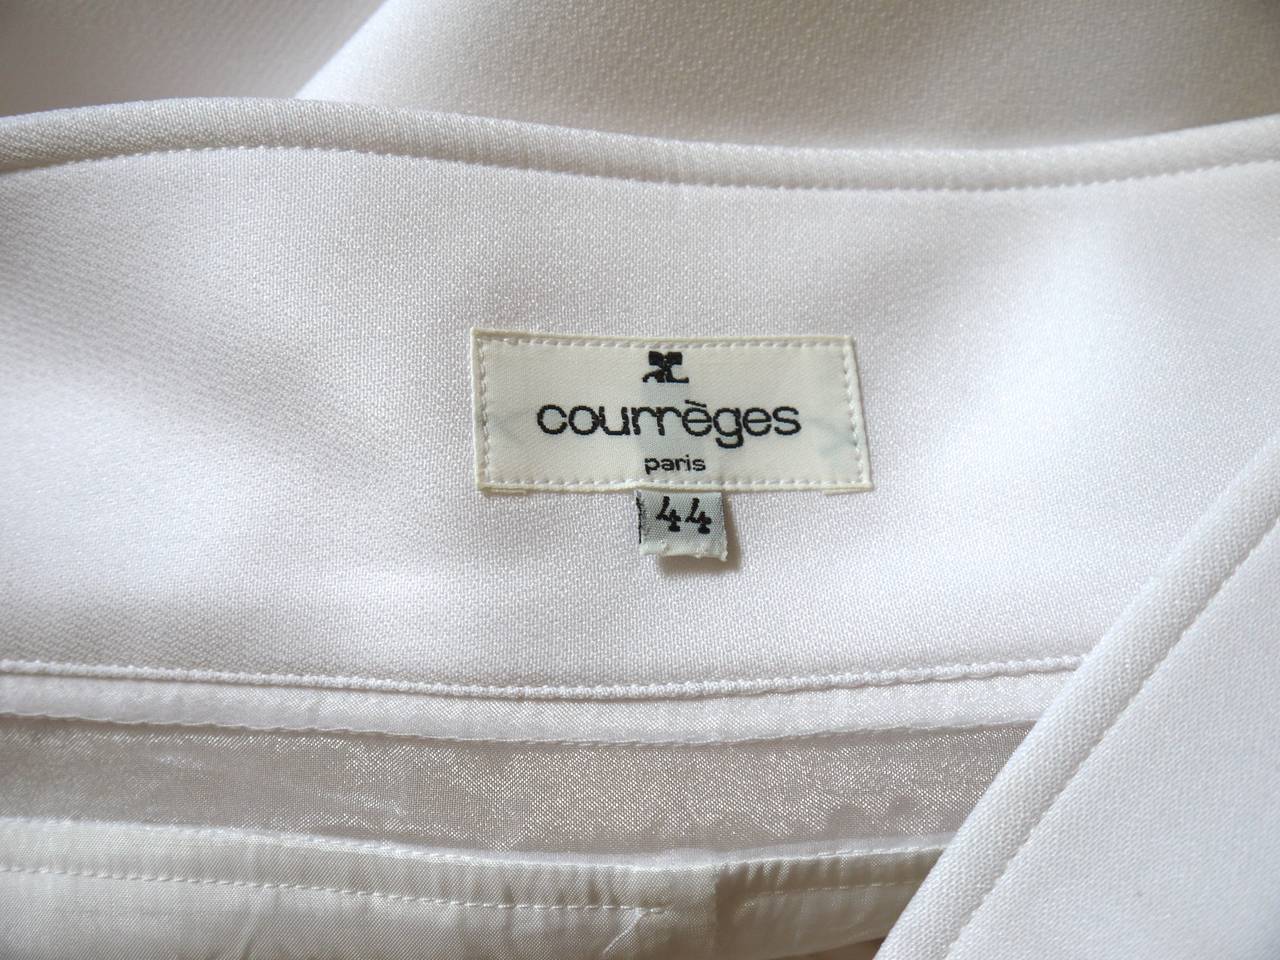 Courreges White Cocktail Dress with Peek-A-Boo Mesh Cross Sections In Excellent Condition For Sale In Boca Raton, FL